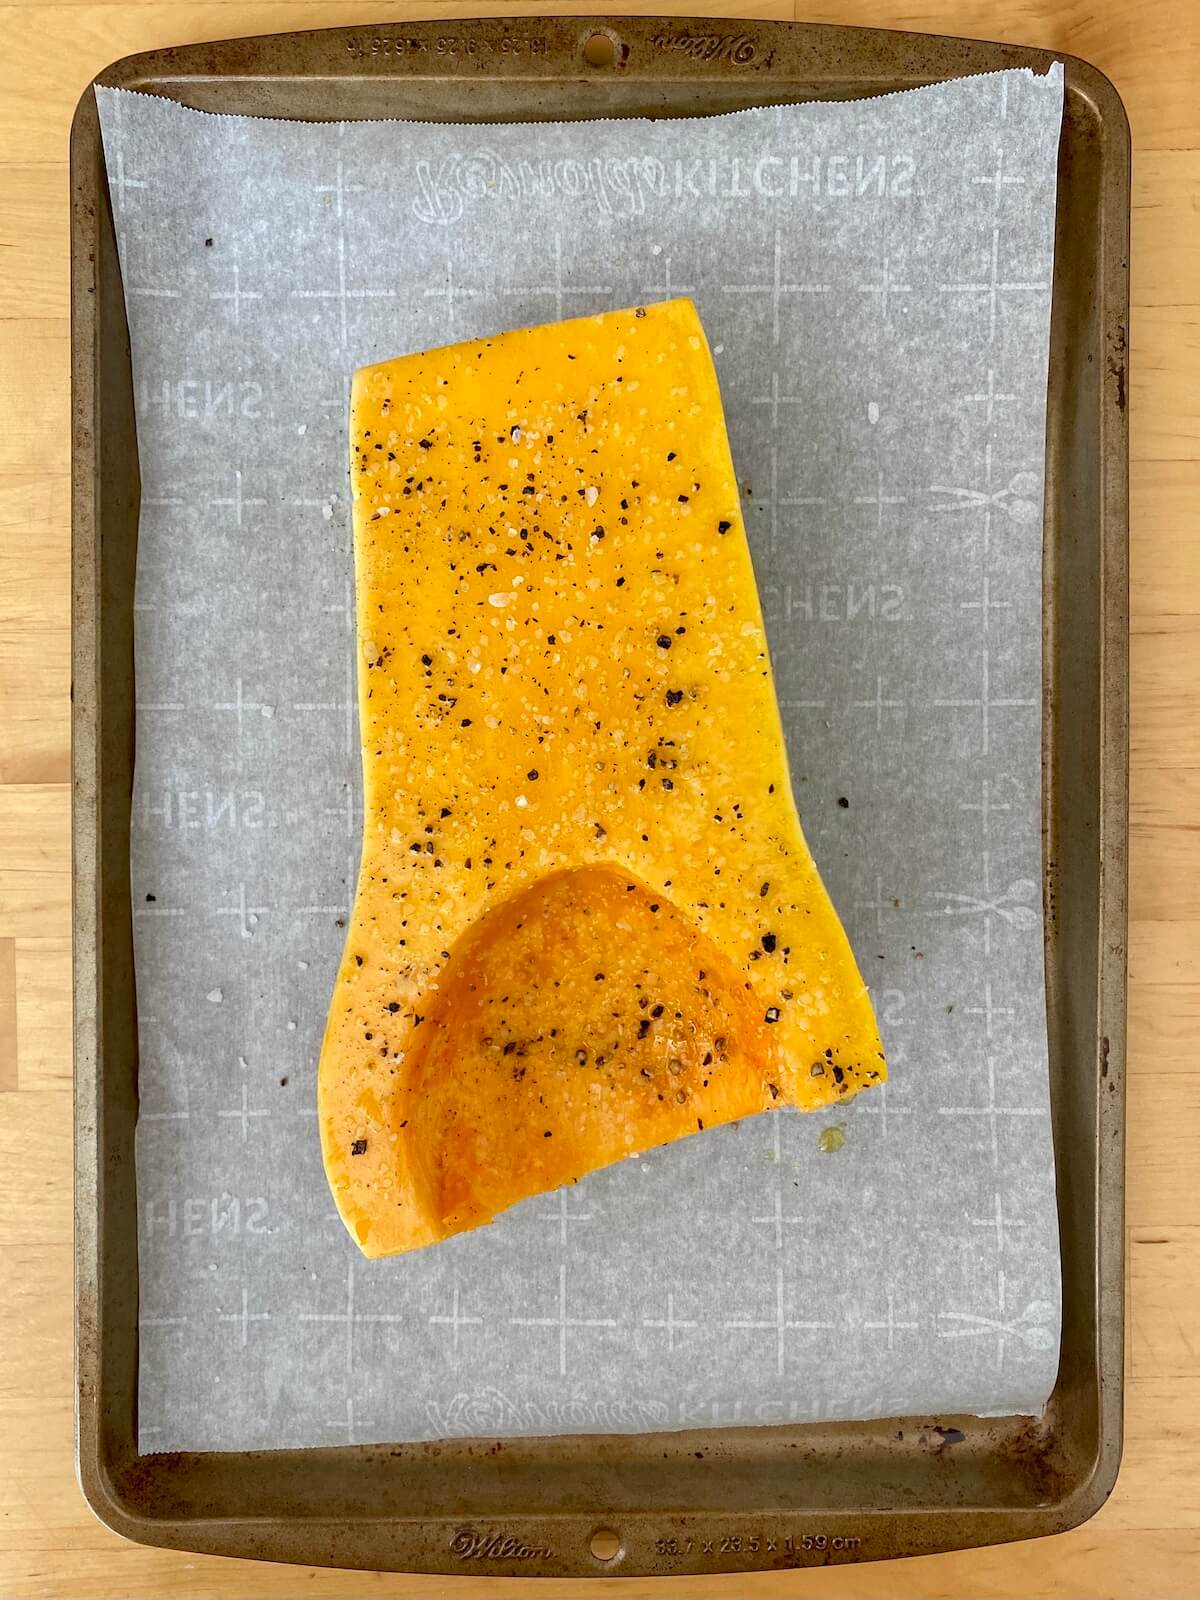 A half of a butternut squash seasoned with salt, pepper, and olive oil on a parchment lined baking sheet before being roasted.